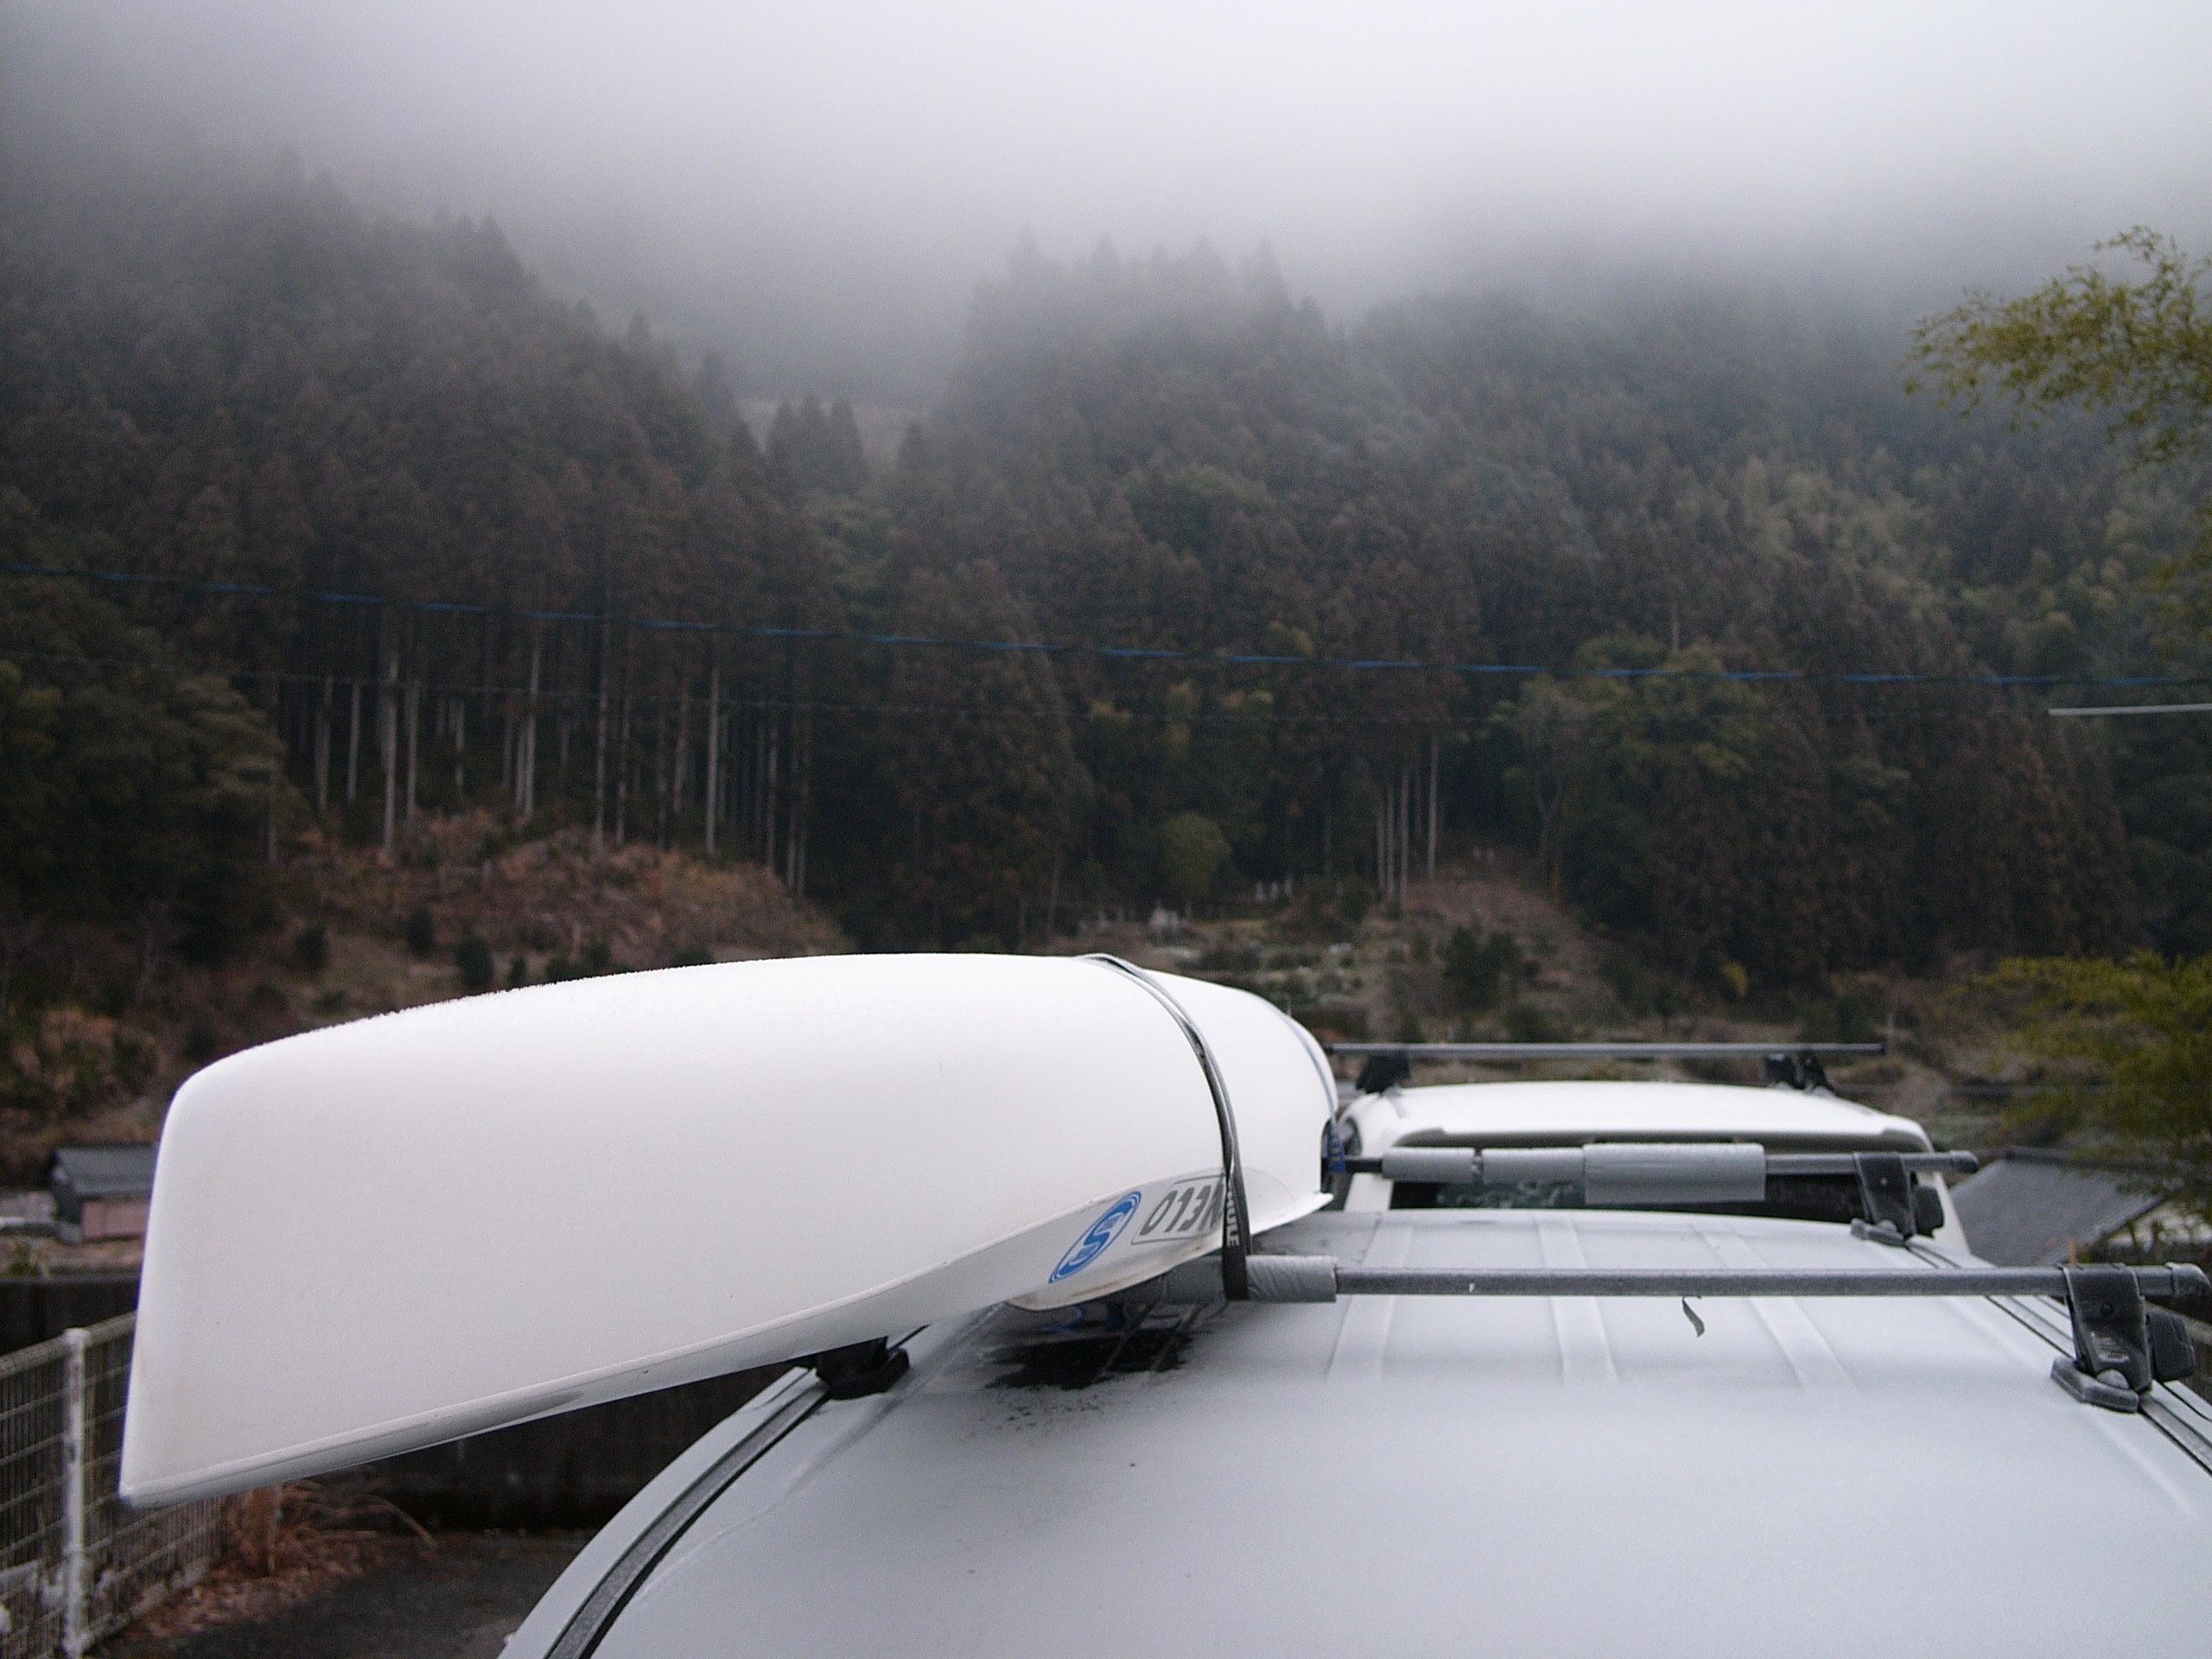 A white racing kayak on the roof of a vehicle.